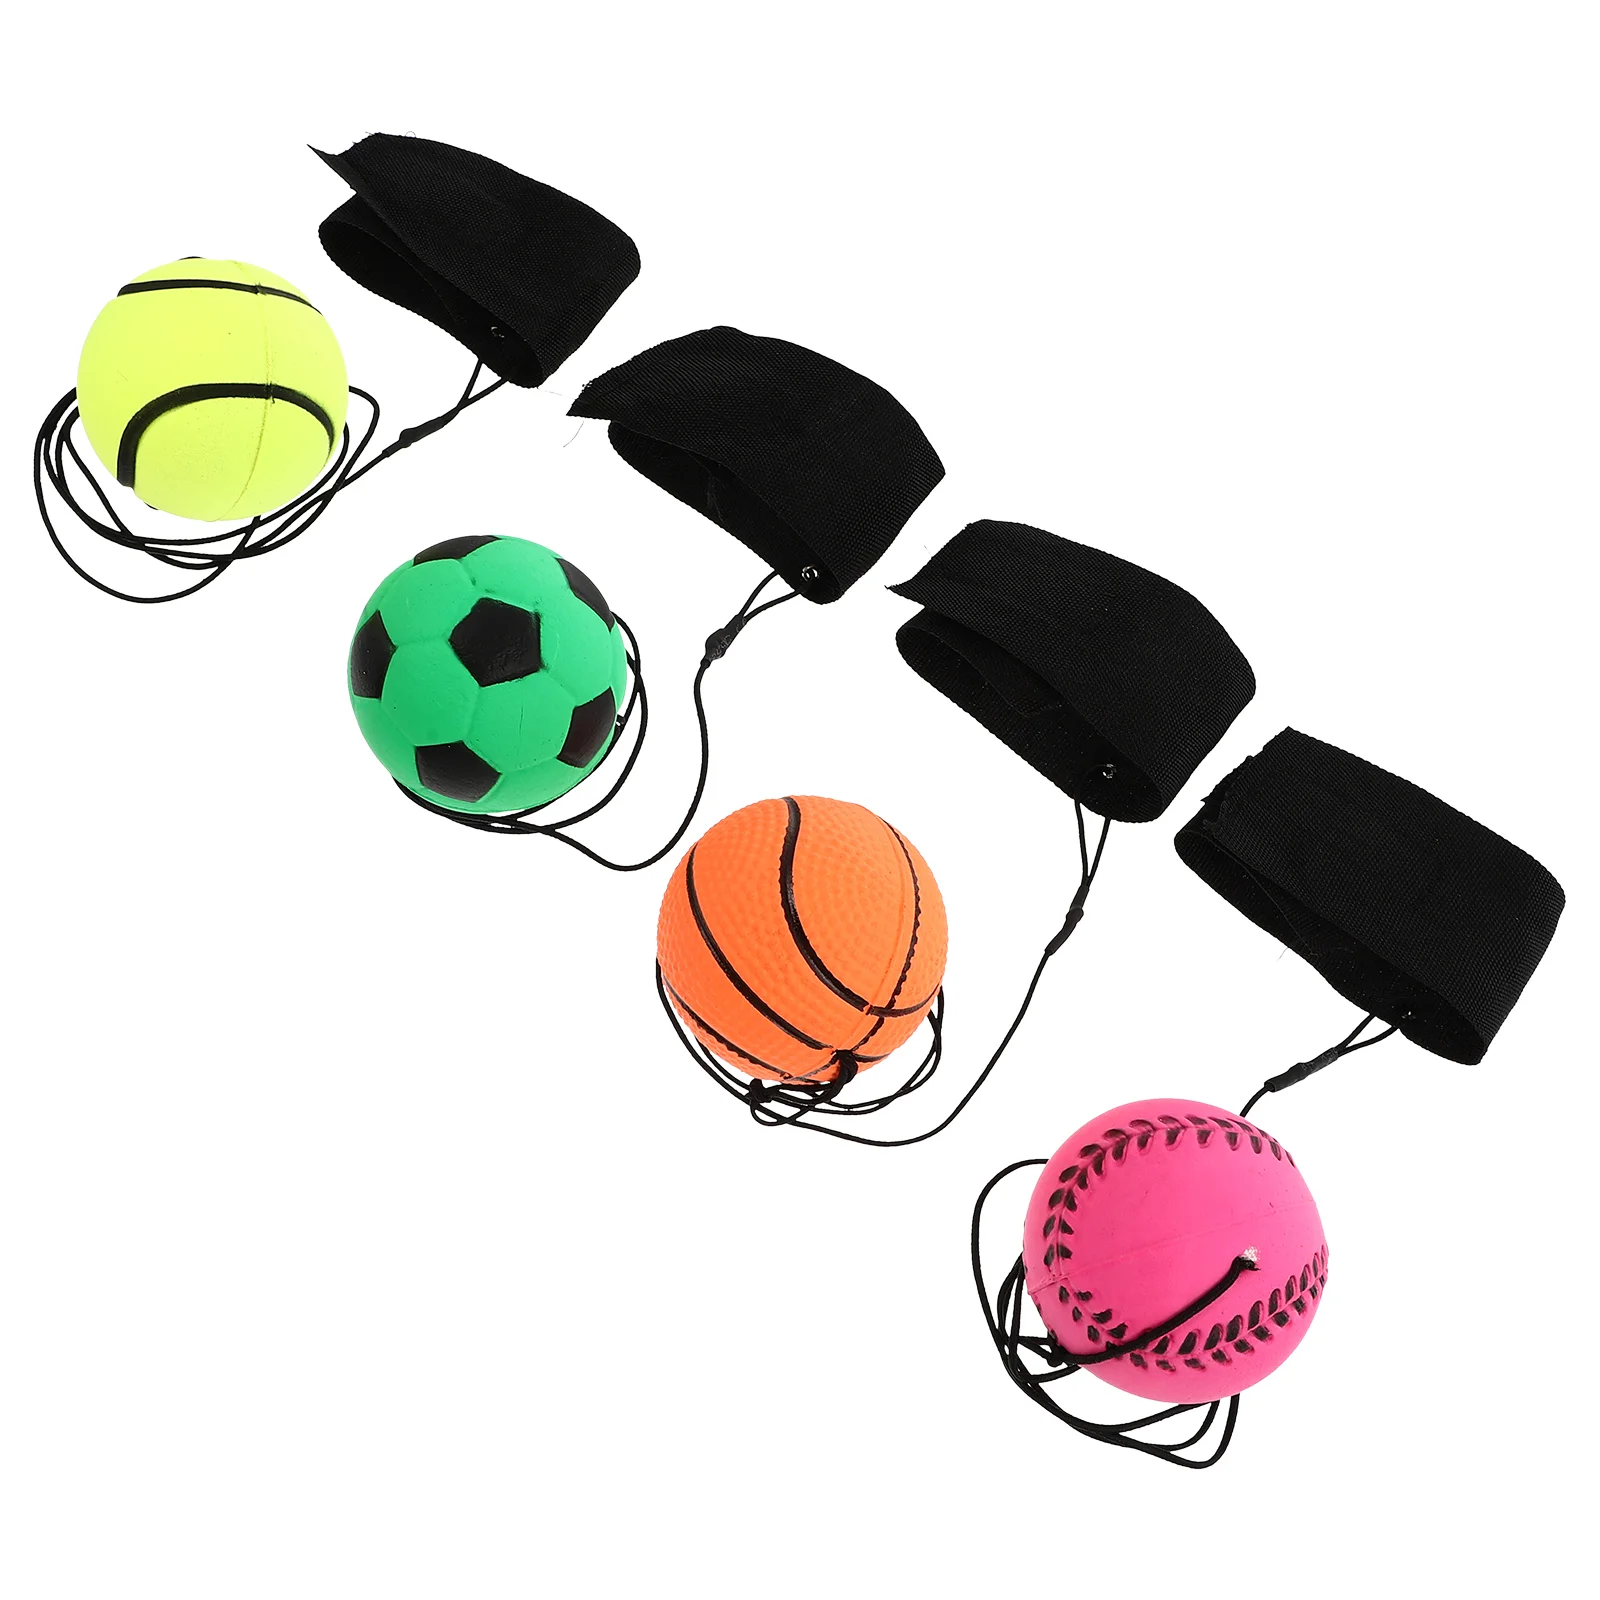 

Wristballs String Returntoywith Bouncy Strap A Baseball Elastic Toys Wristband Rubber Throwingkids Bandand Attached Relaxing